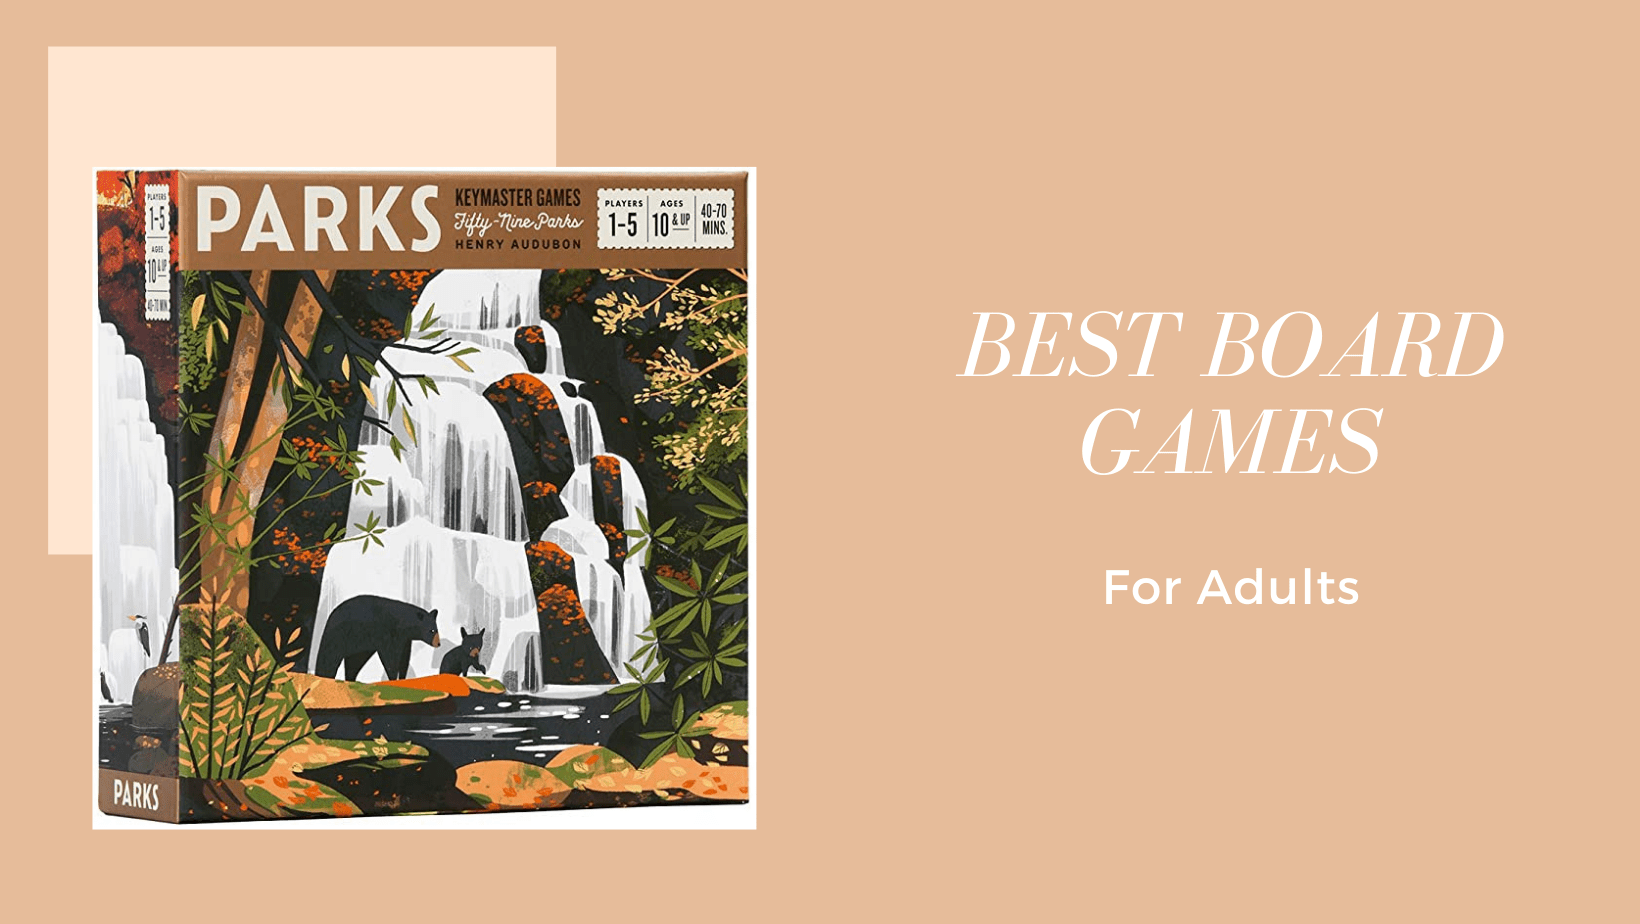 The board game Parks as one of the best board games for adults.